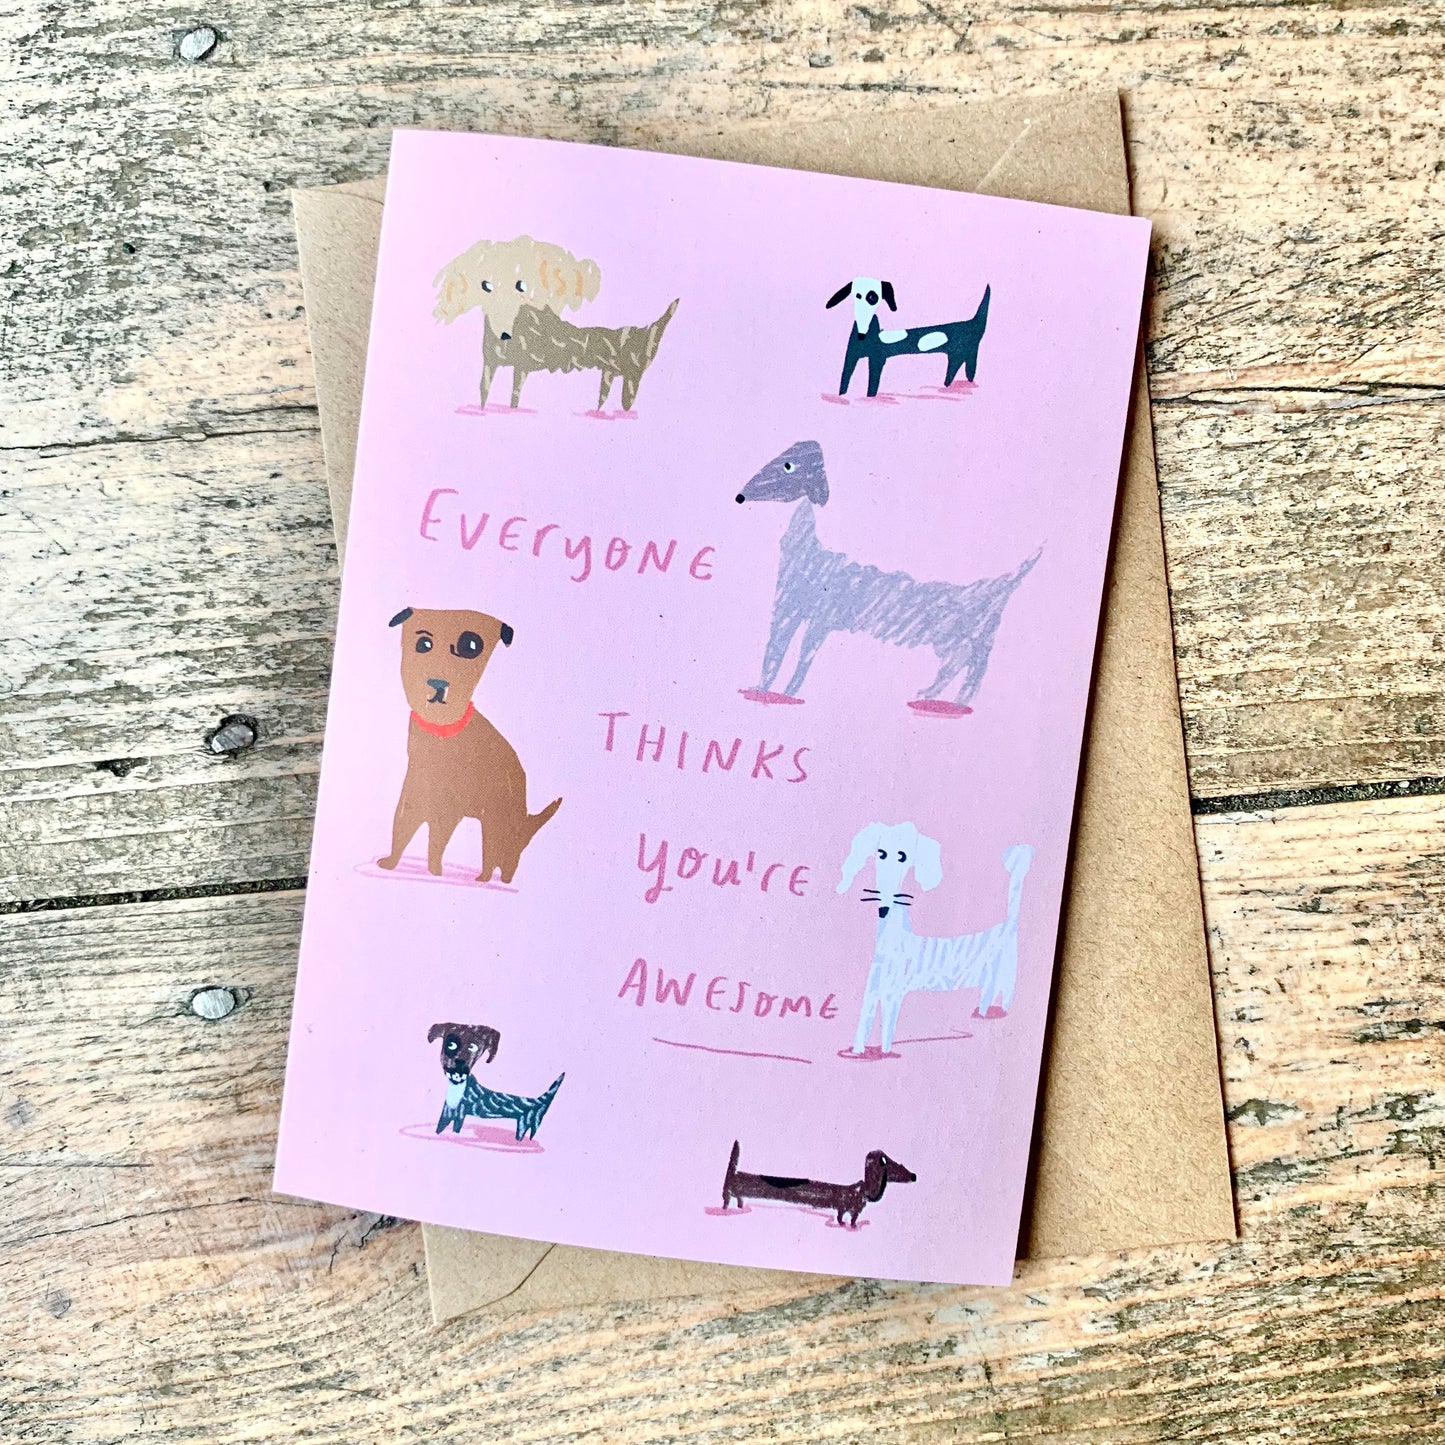 Everyone thinks you're awesome greeting card